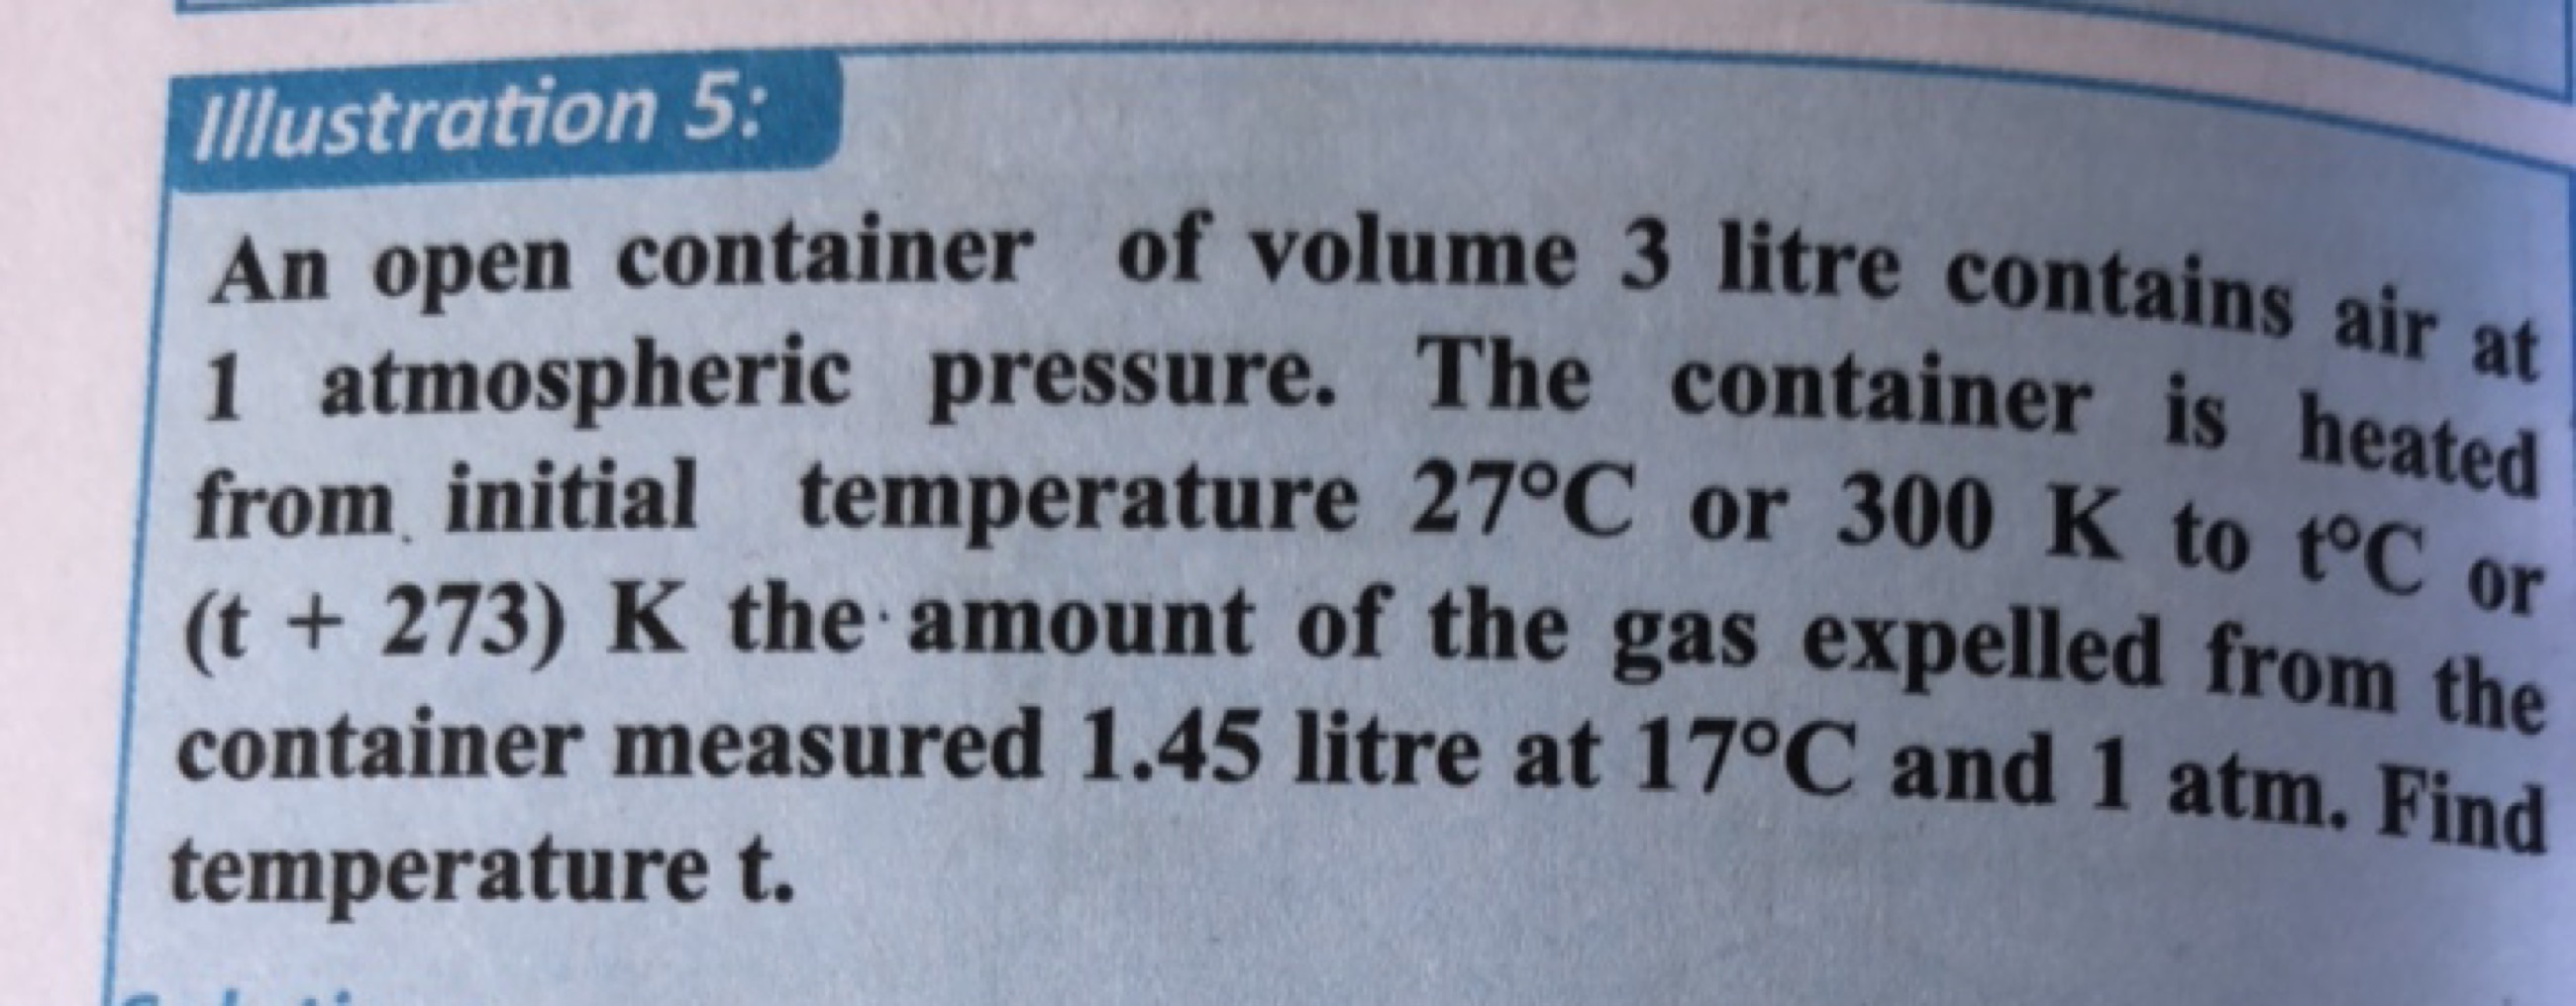 Illustration 5:
An open container of volume 3 litre contains air at 1 